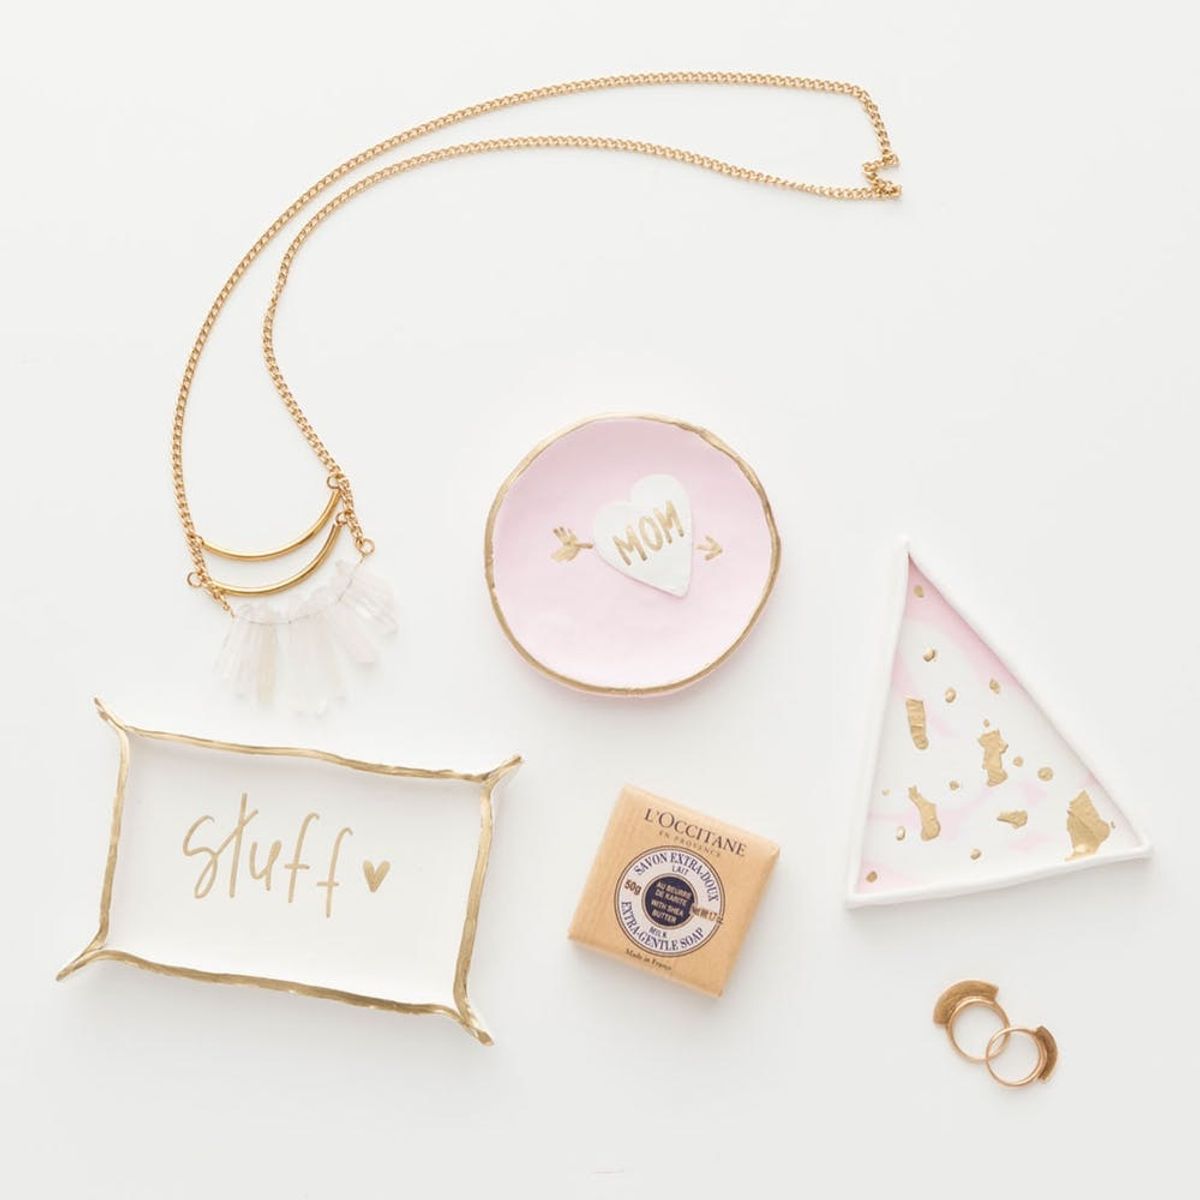 Remix This Brit Kit for a Thoughtful DIY Mother’s Day Gift